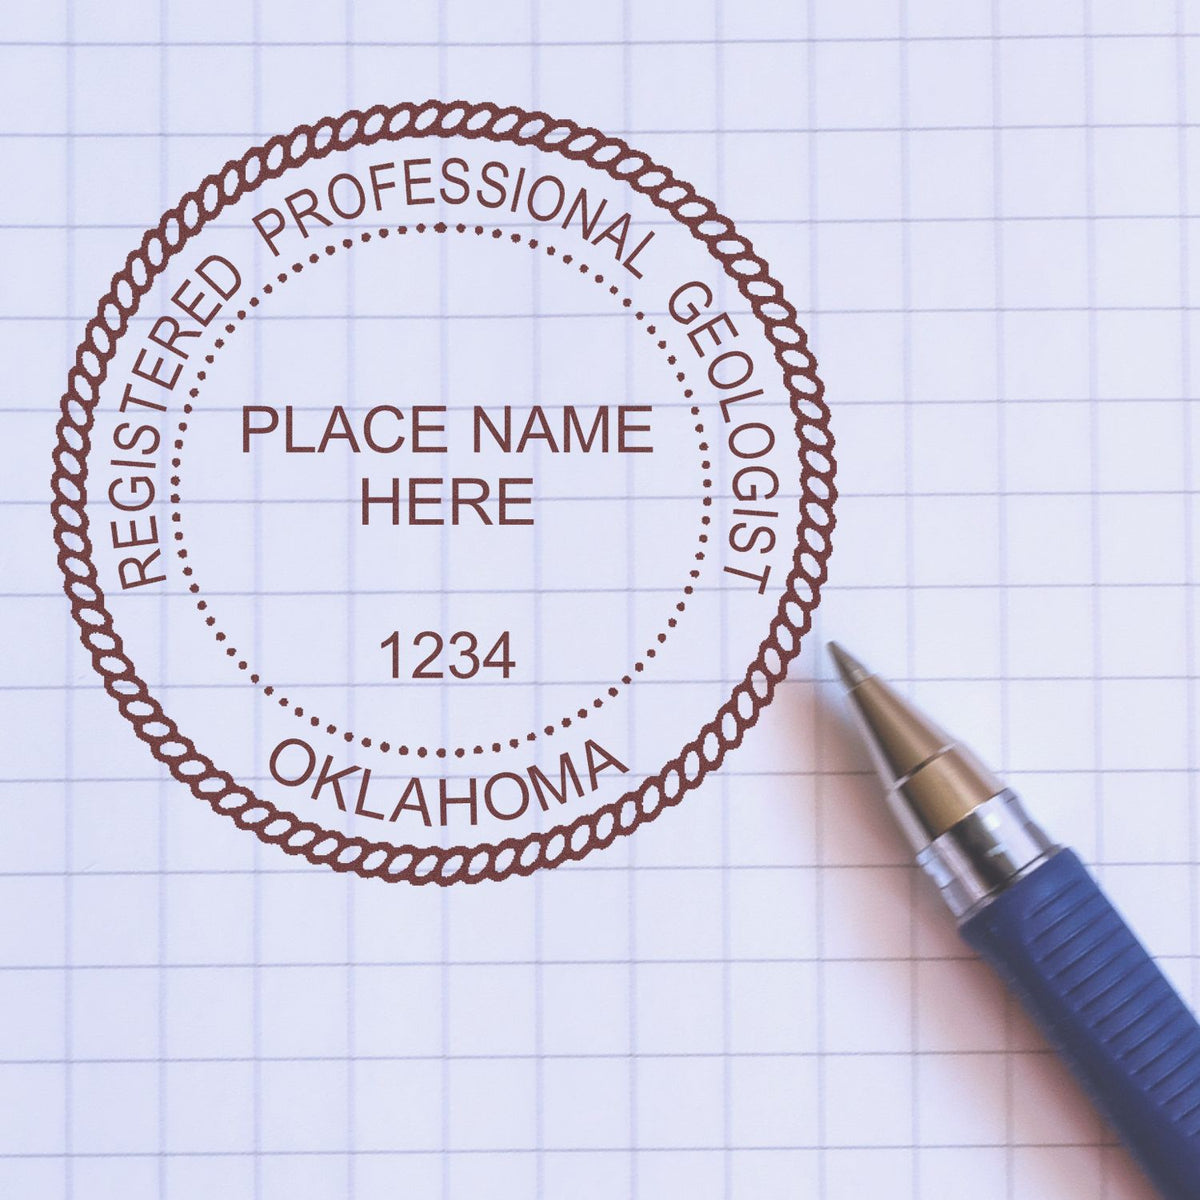 Another Example of a stamped impression of the Digital Oklahoma Geologist Stamp, Electronic Seal for Oklahoma Geologist on a office form